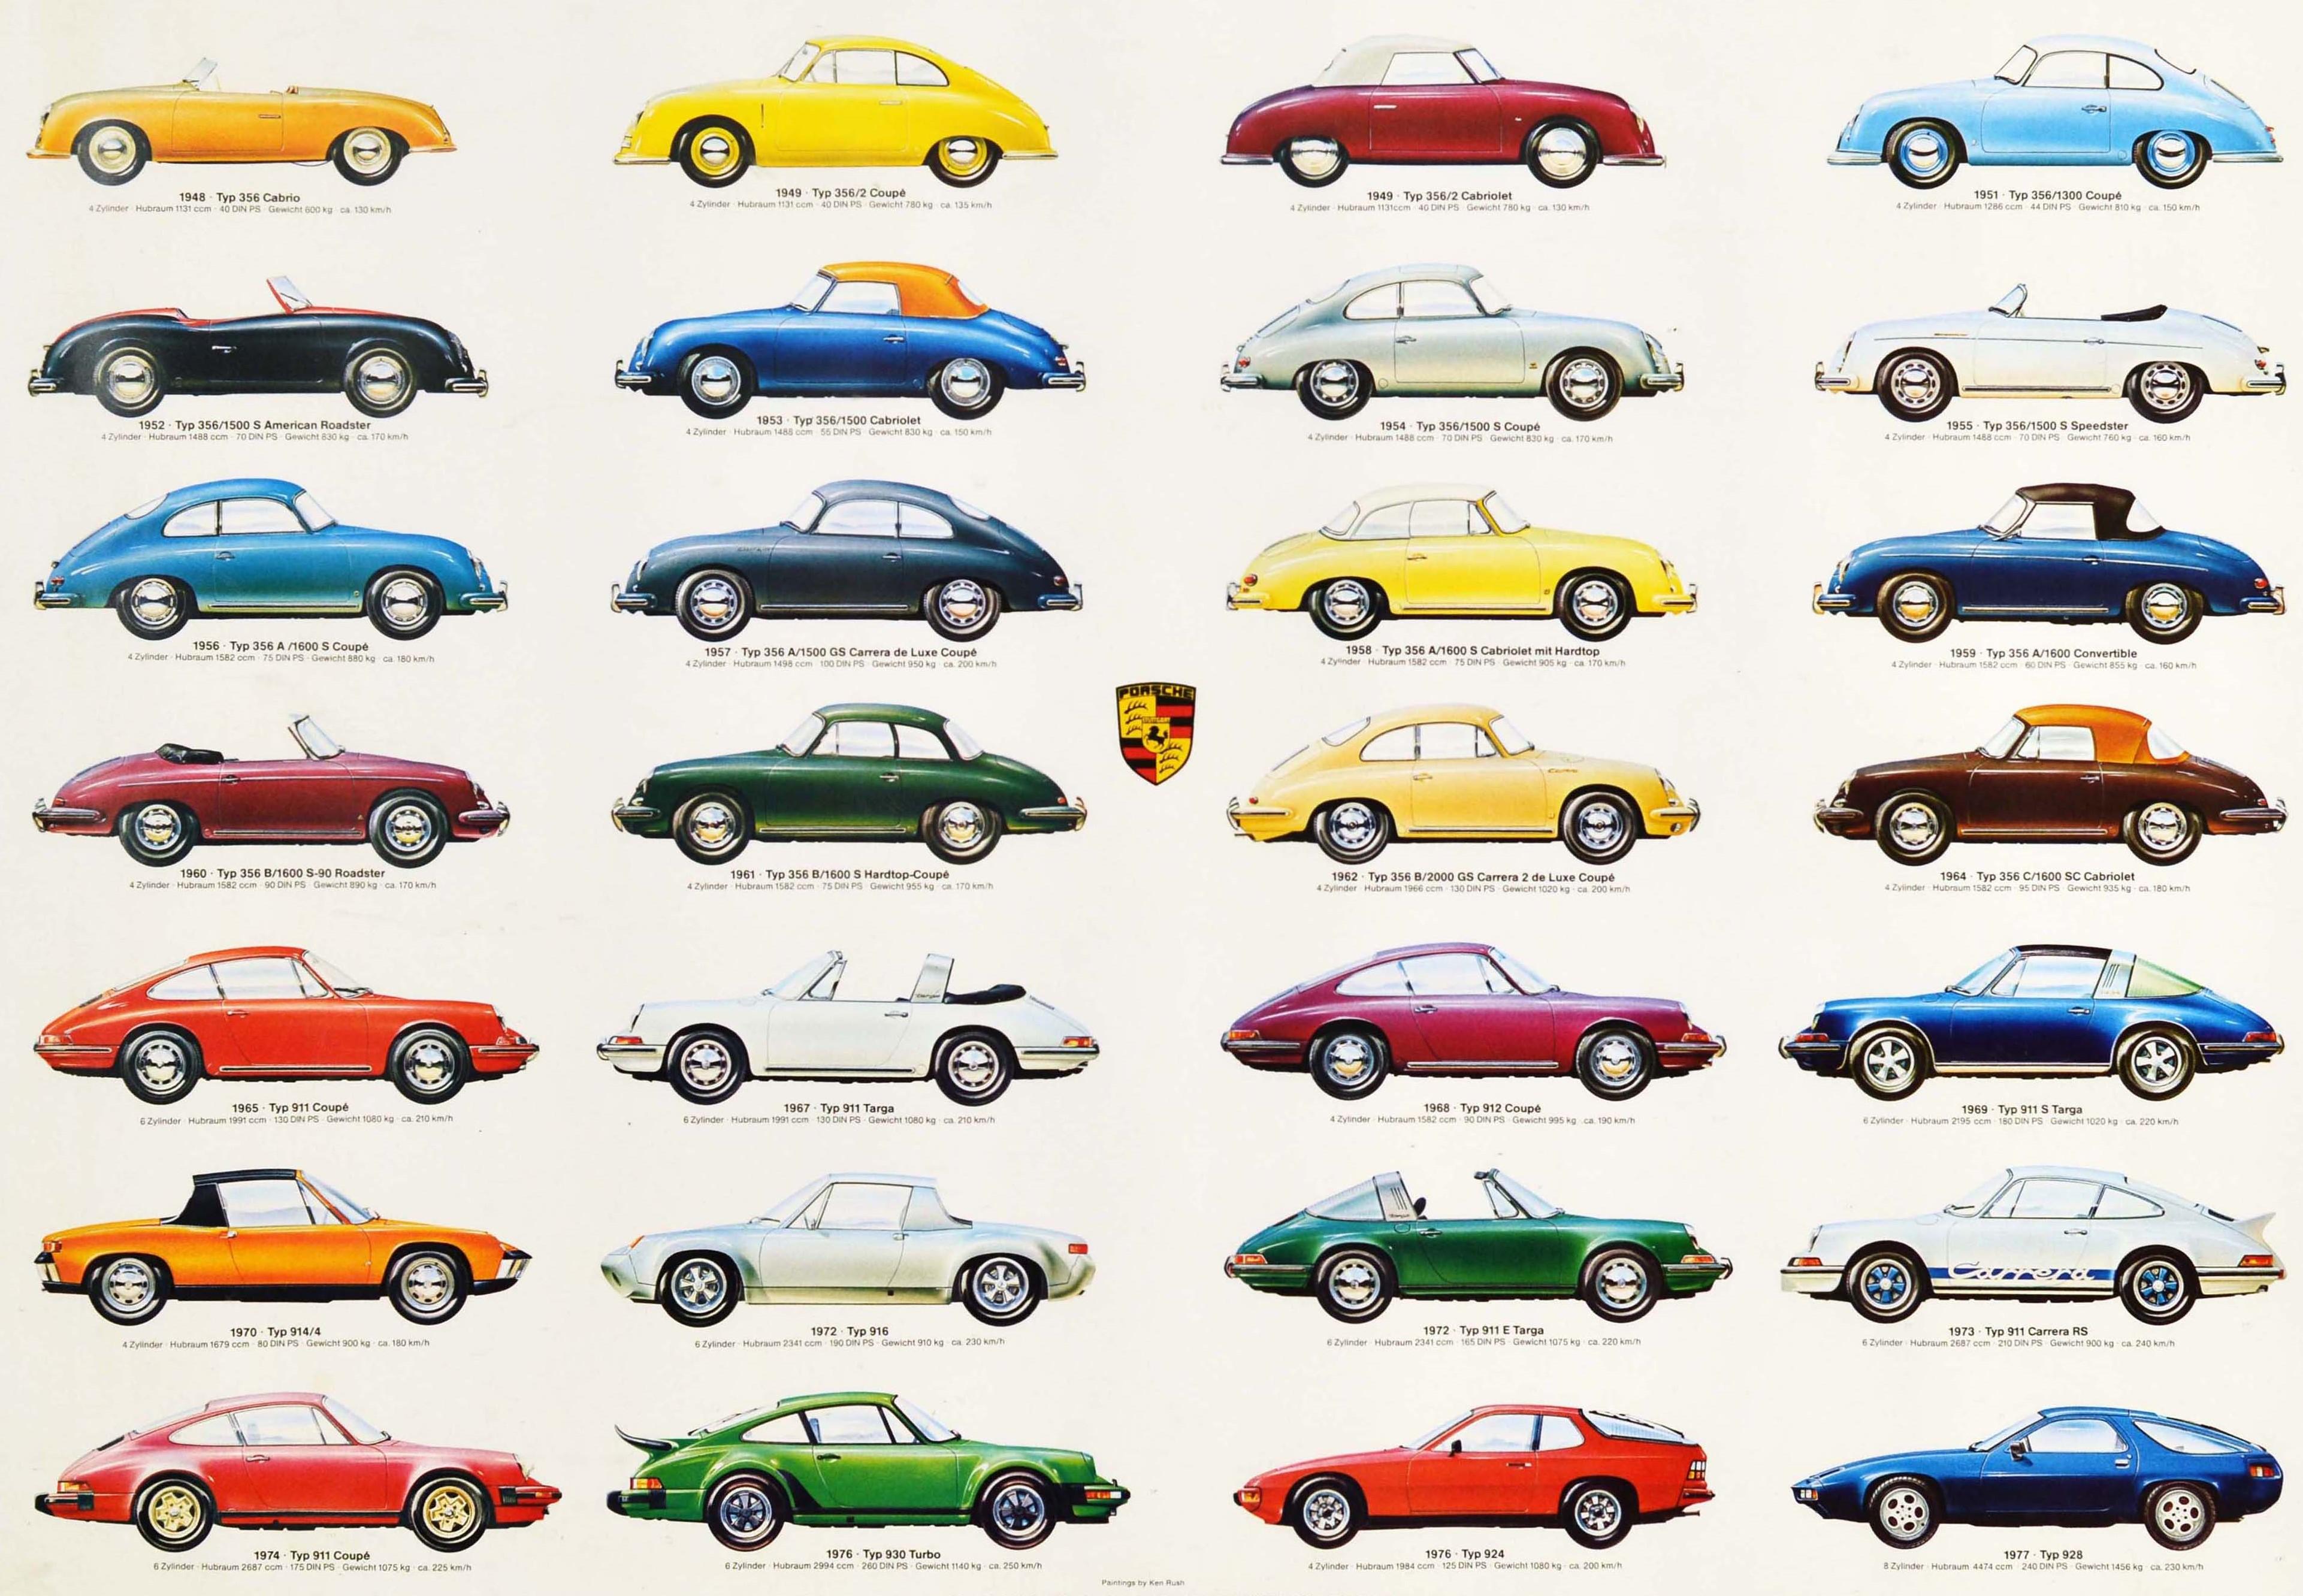 Original vintage advertising poster for Porsche car models depicting various cars including 356, 911, 912, 914, 916, 924, 928 and 930 models produced from the Typ 356 Cabrio released in 1948 to the Typ 928 released in 1977. Great artwork of these